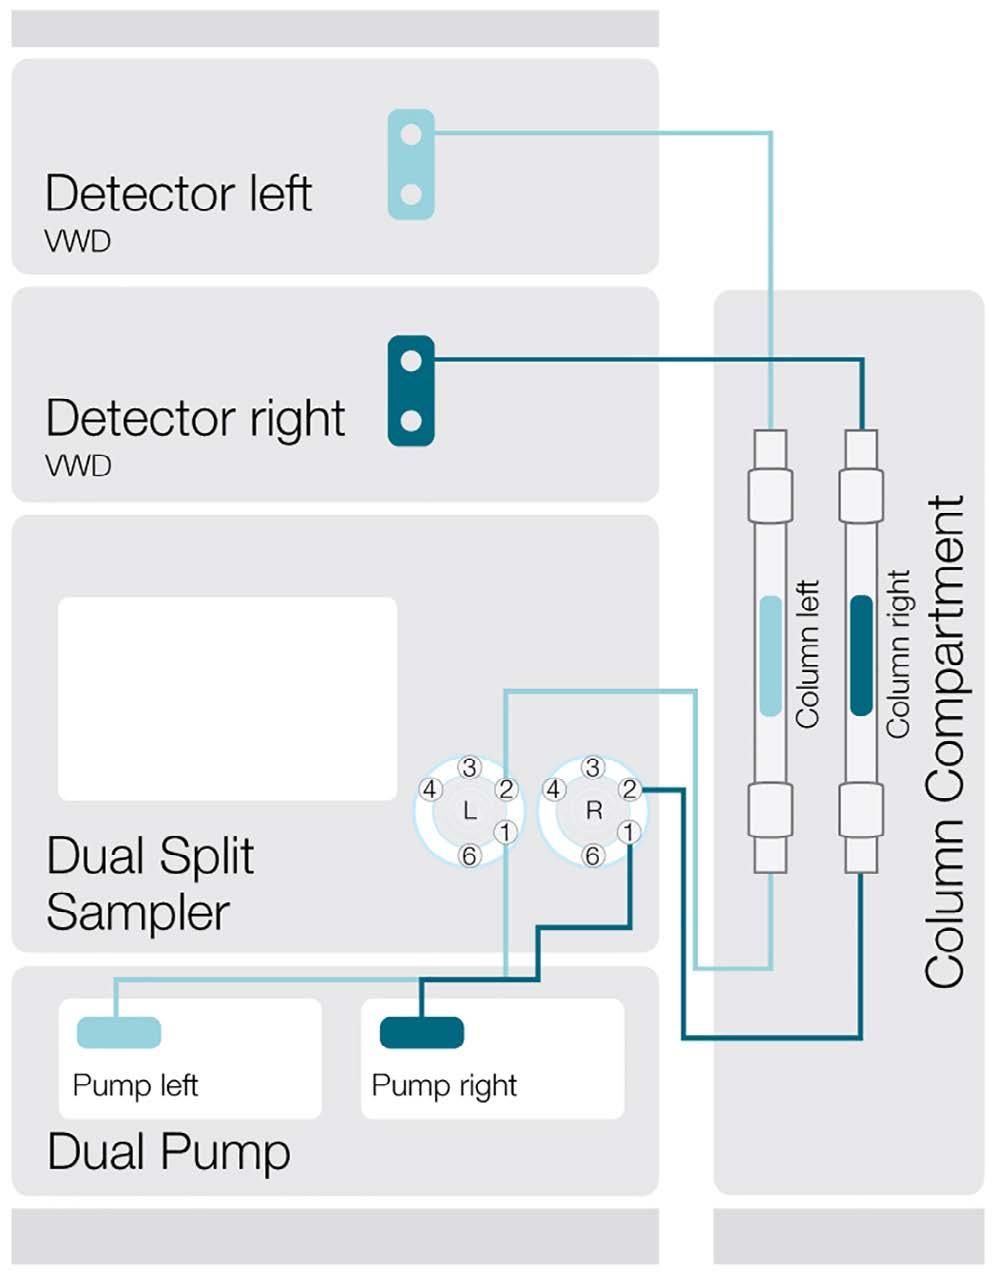 Results and discussion The Vanquish Flex Duo system for Dual LC provides two separated fluidic pathways in one instrument, as can be seen in Figure 3.